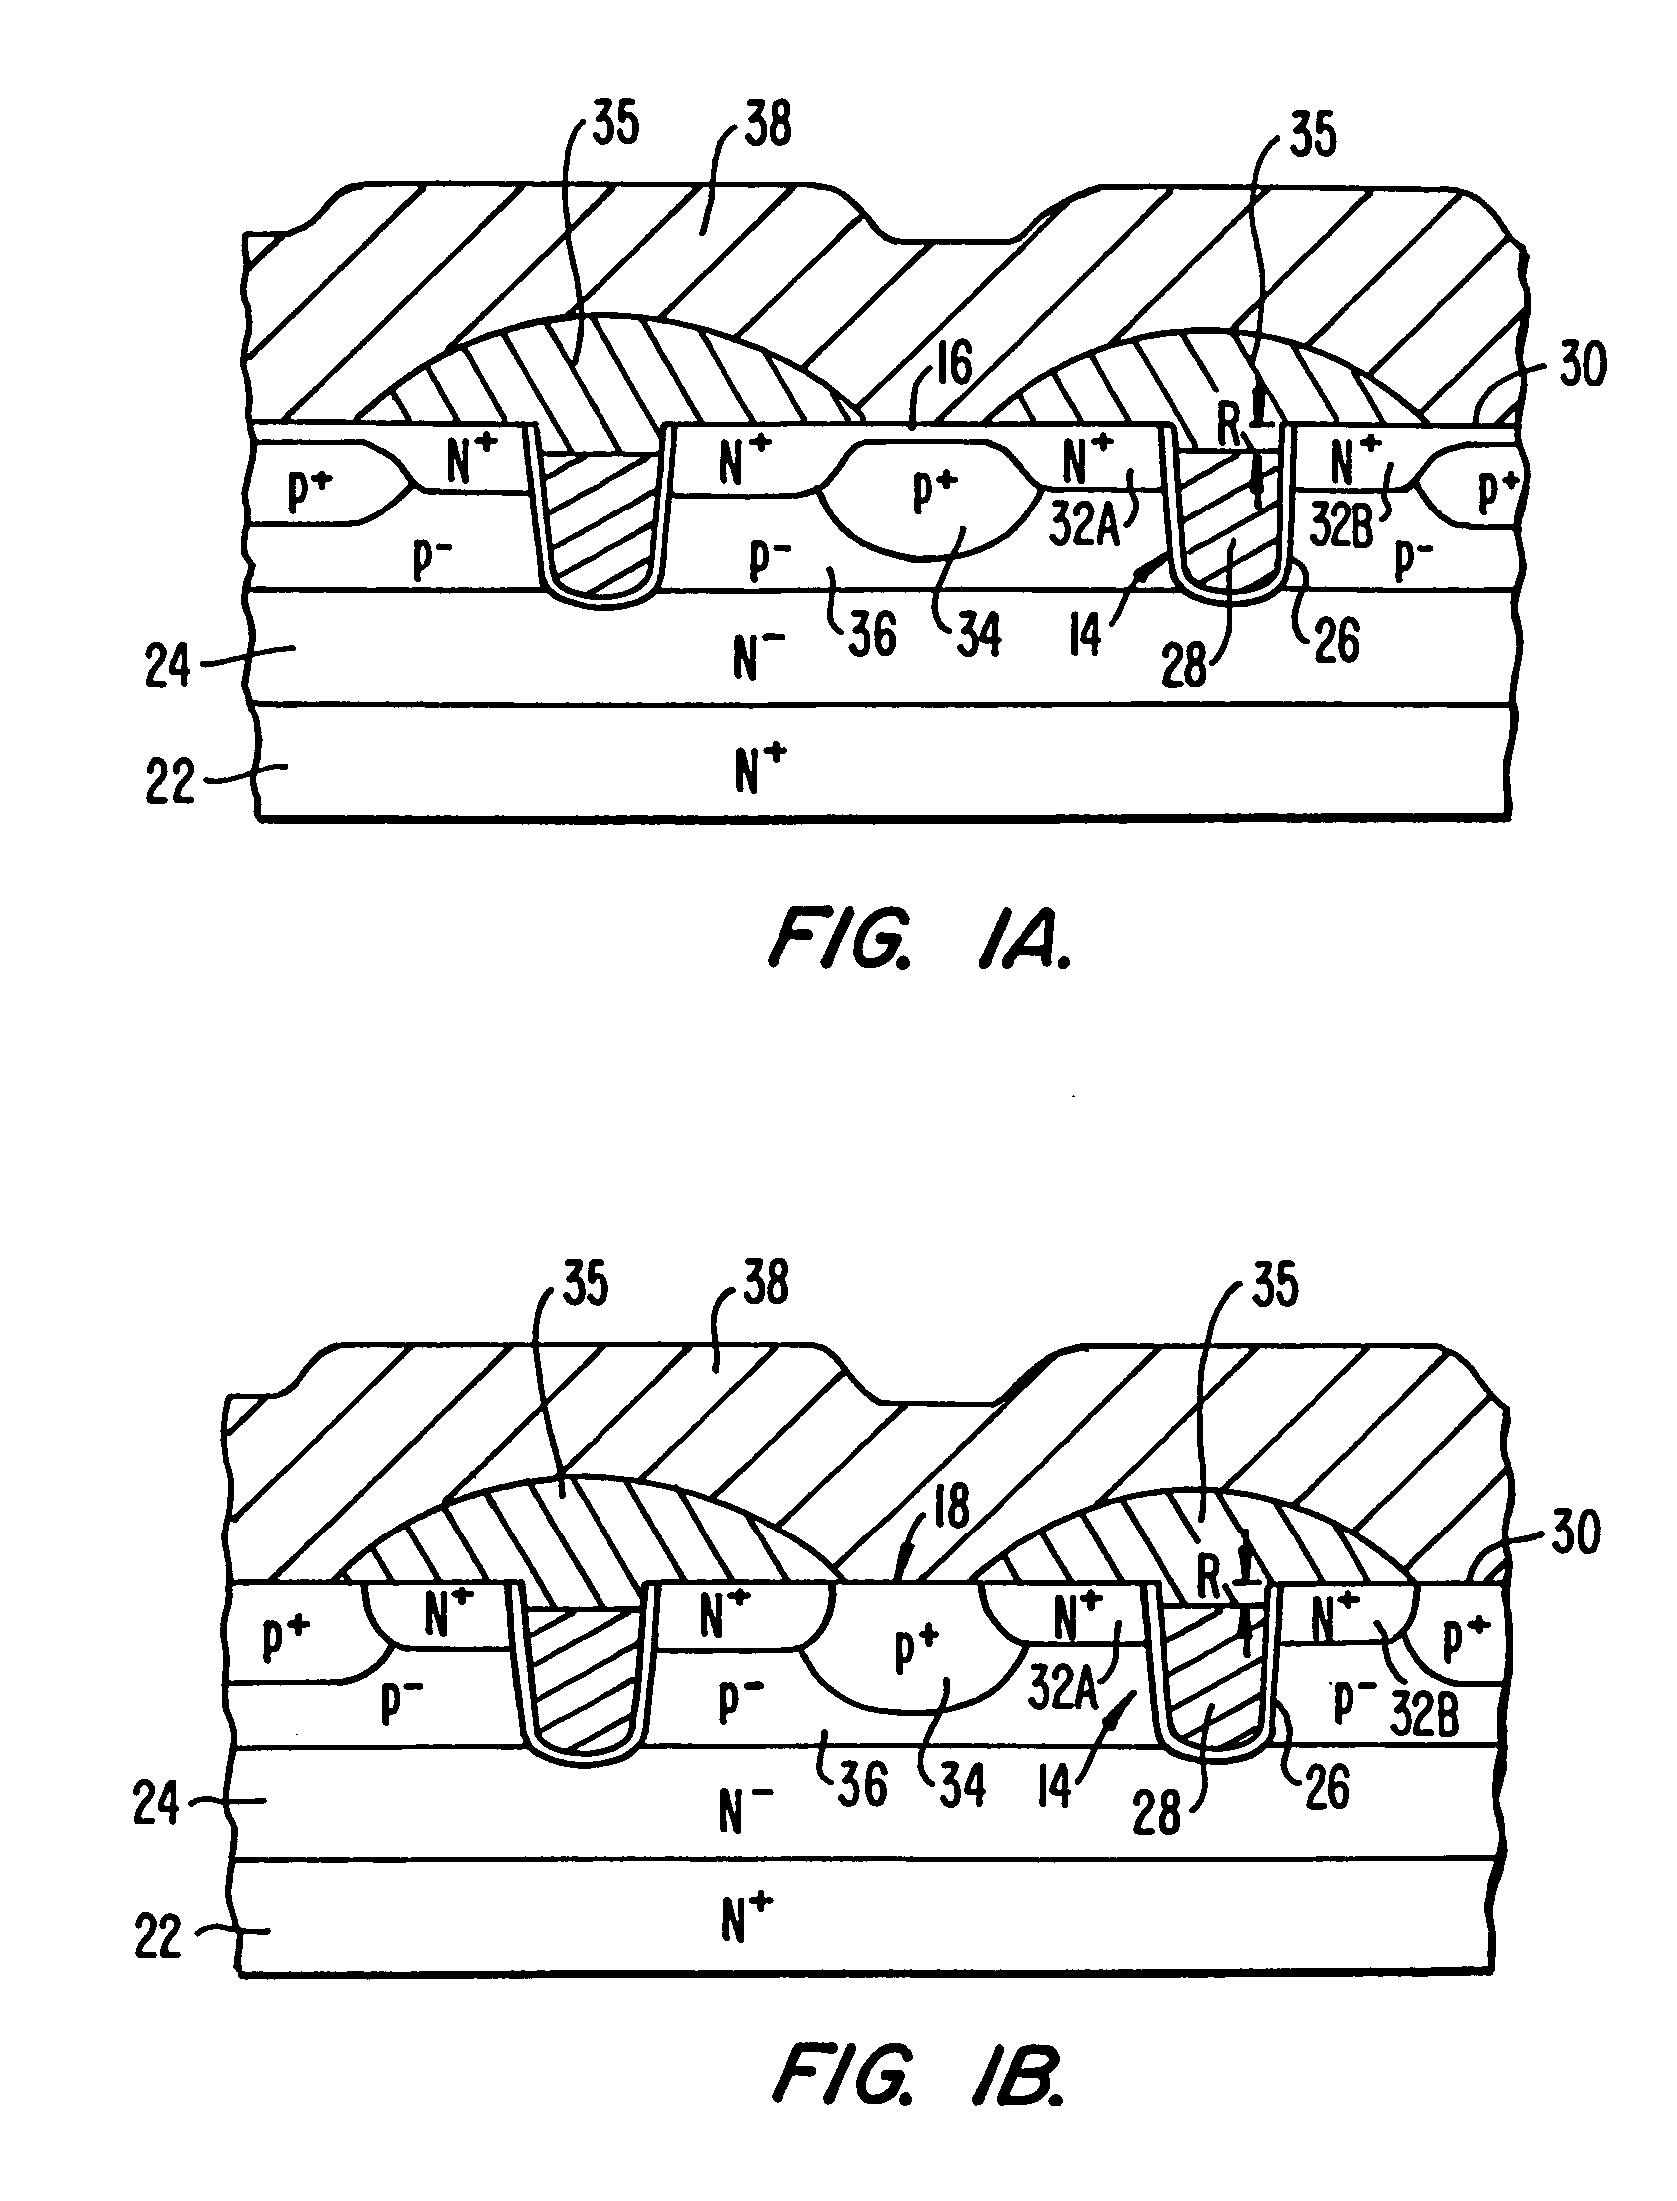 Method of manufacturing a trench transistor having a heavy body region